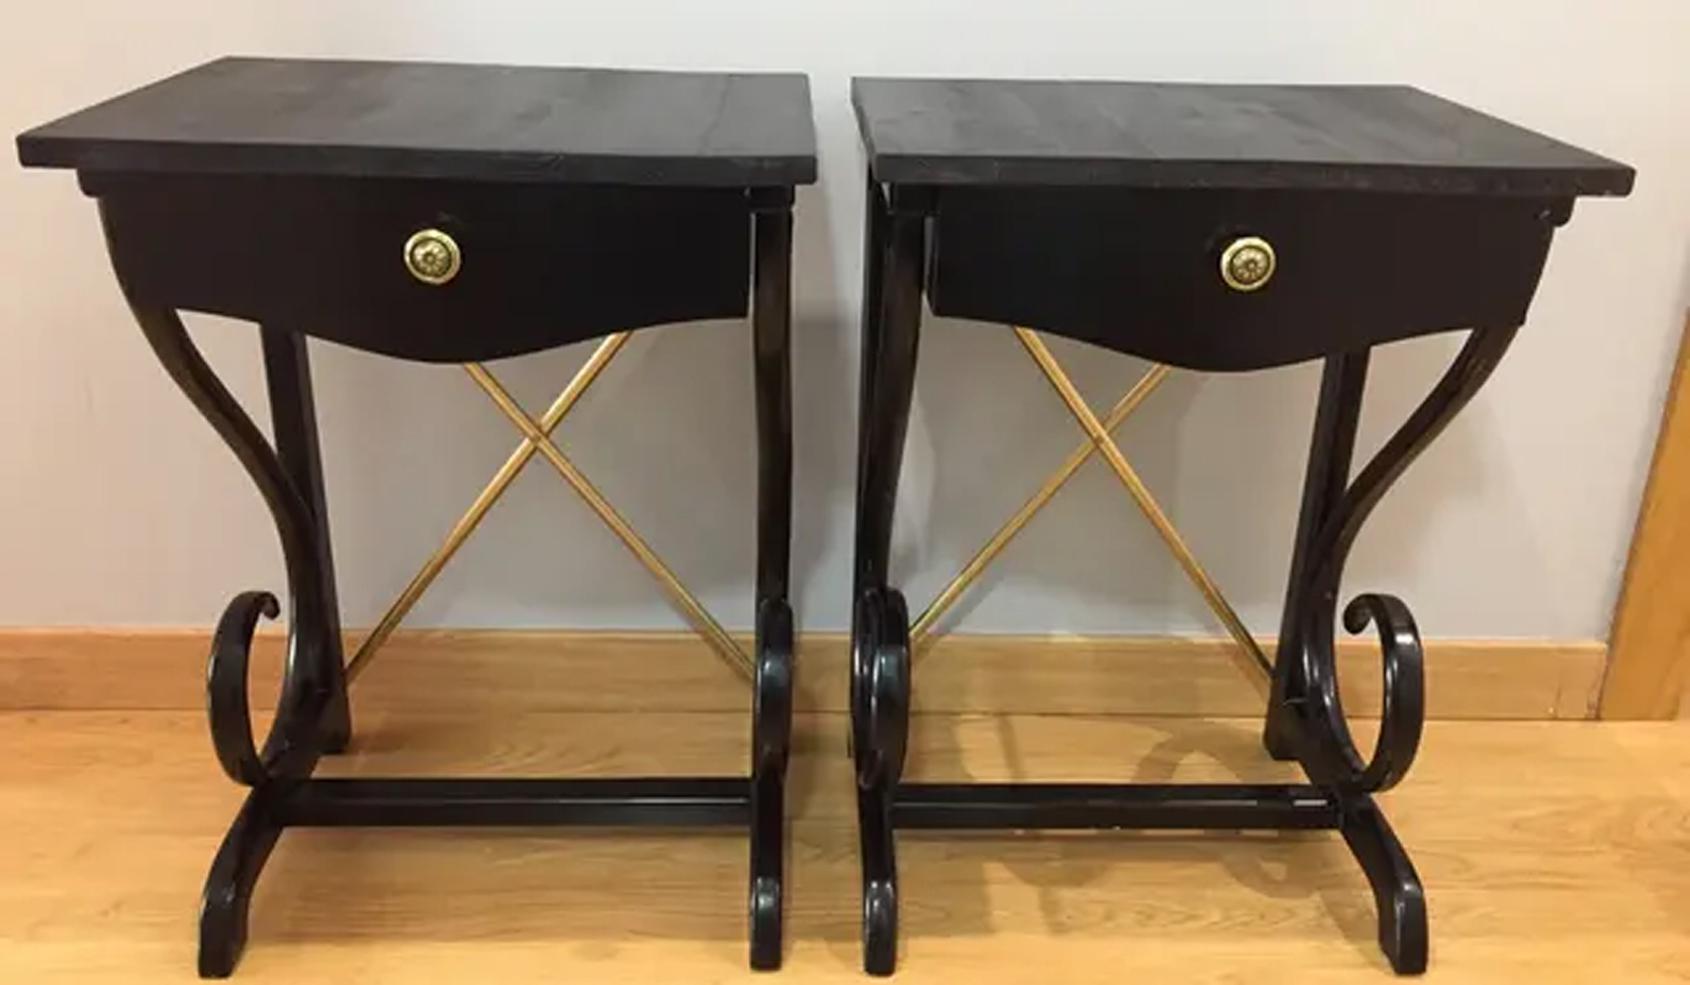 Pair of midcentury night tables Thonet style ebonized nightstands or end tables

Black bentwood and brass,

One drawer.
   